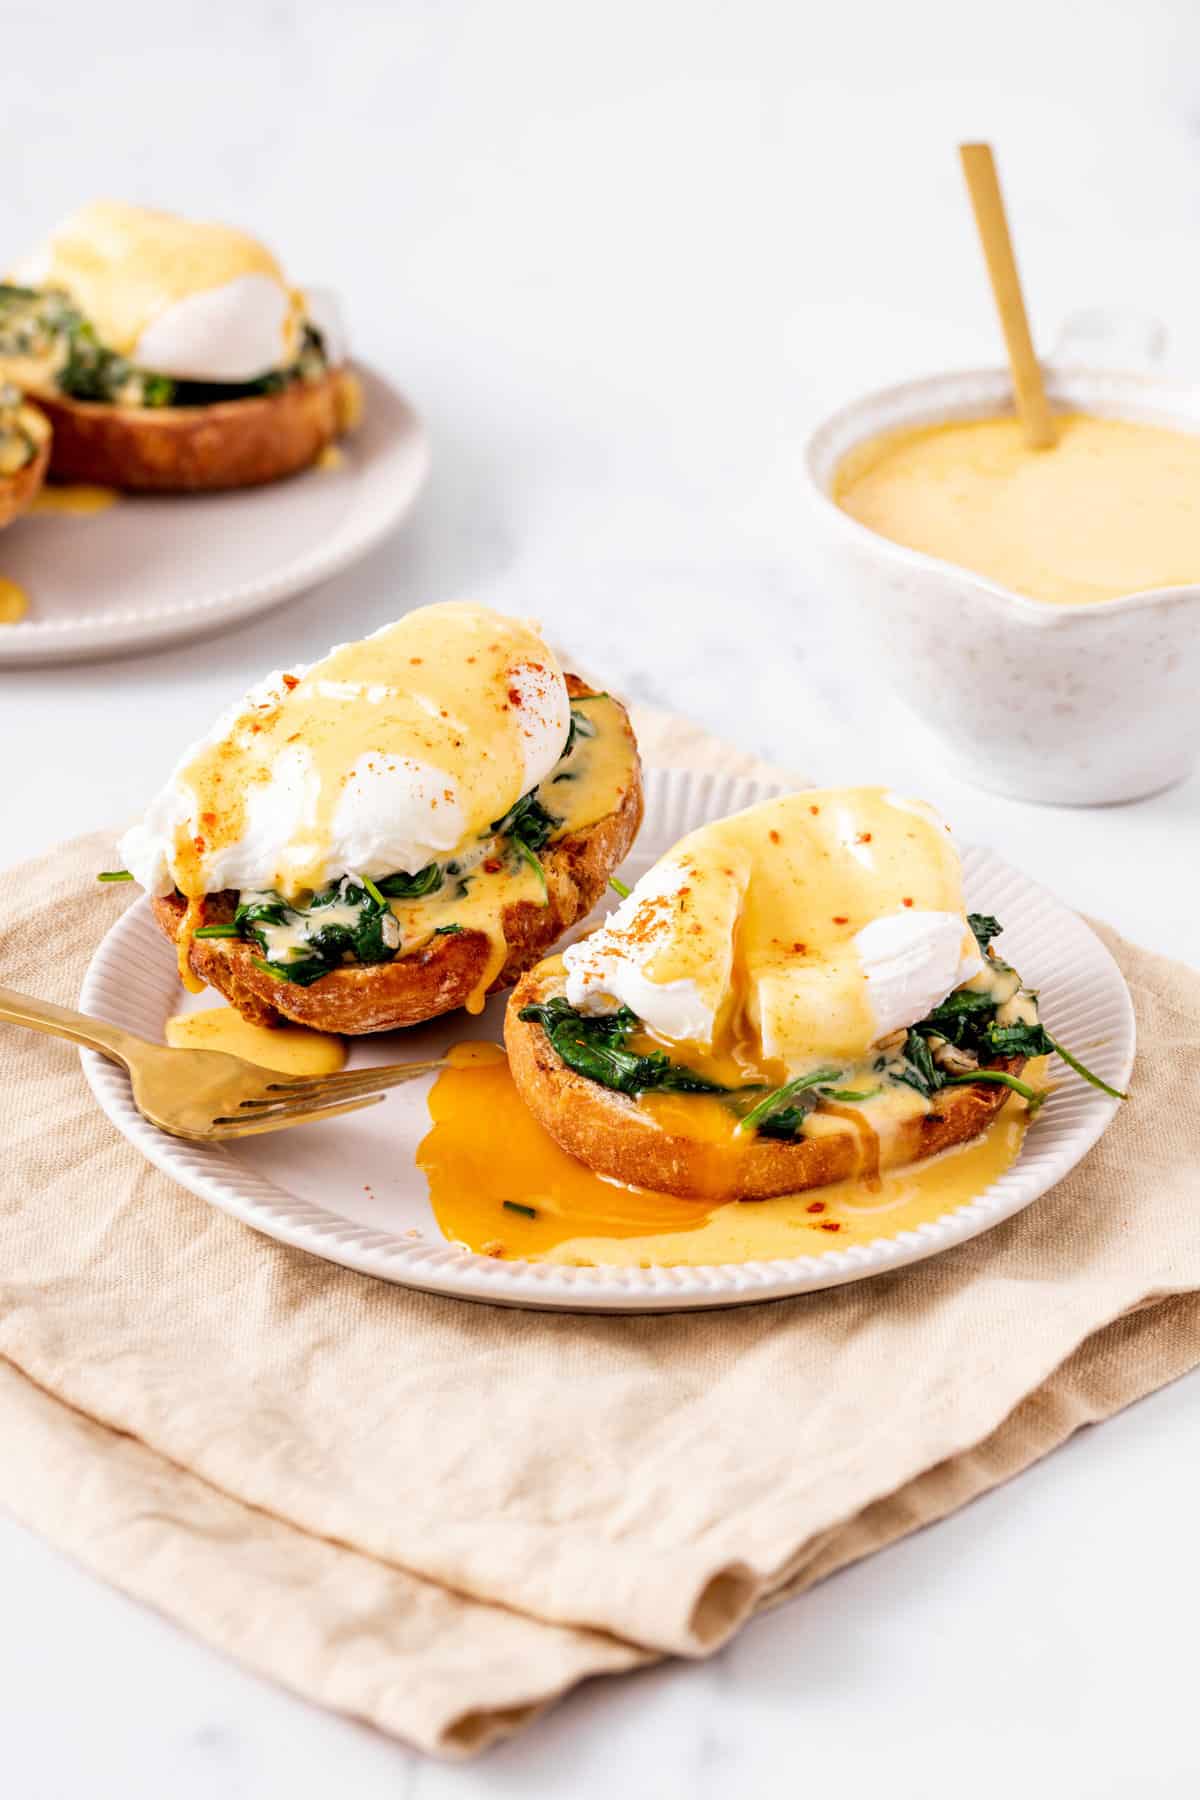 two eggs florentine served on a white plate with a gold fork, sitting on a beige kitchen towel